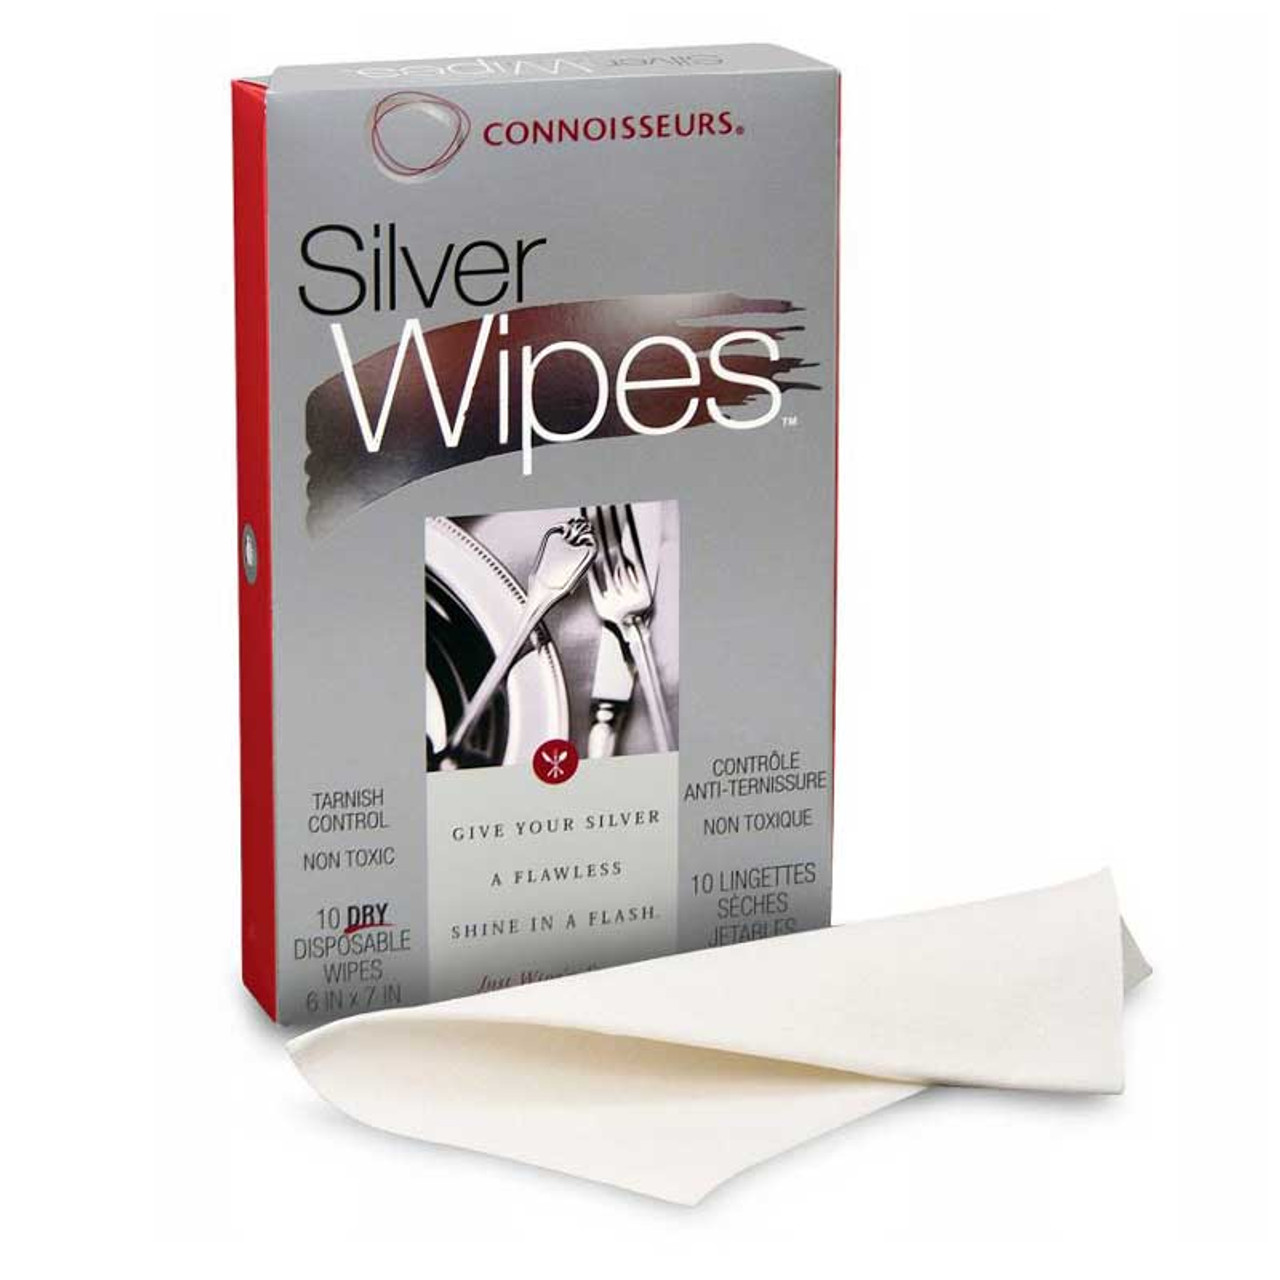 Wipes & Clothes - Connoisseurs Jewelry Cleaner